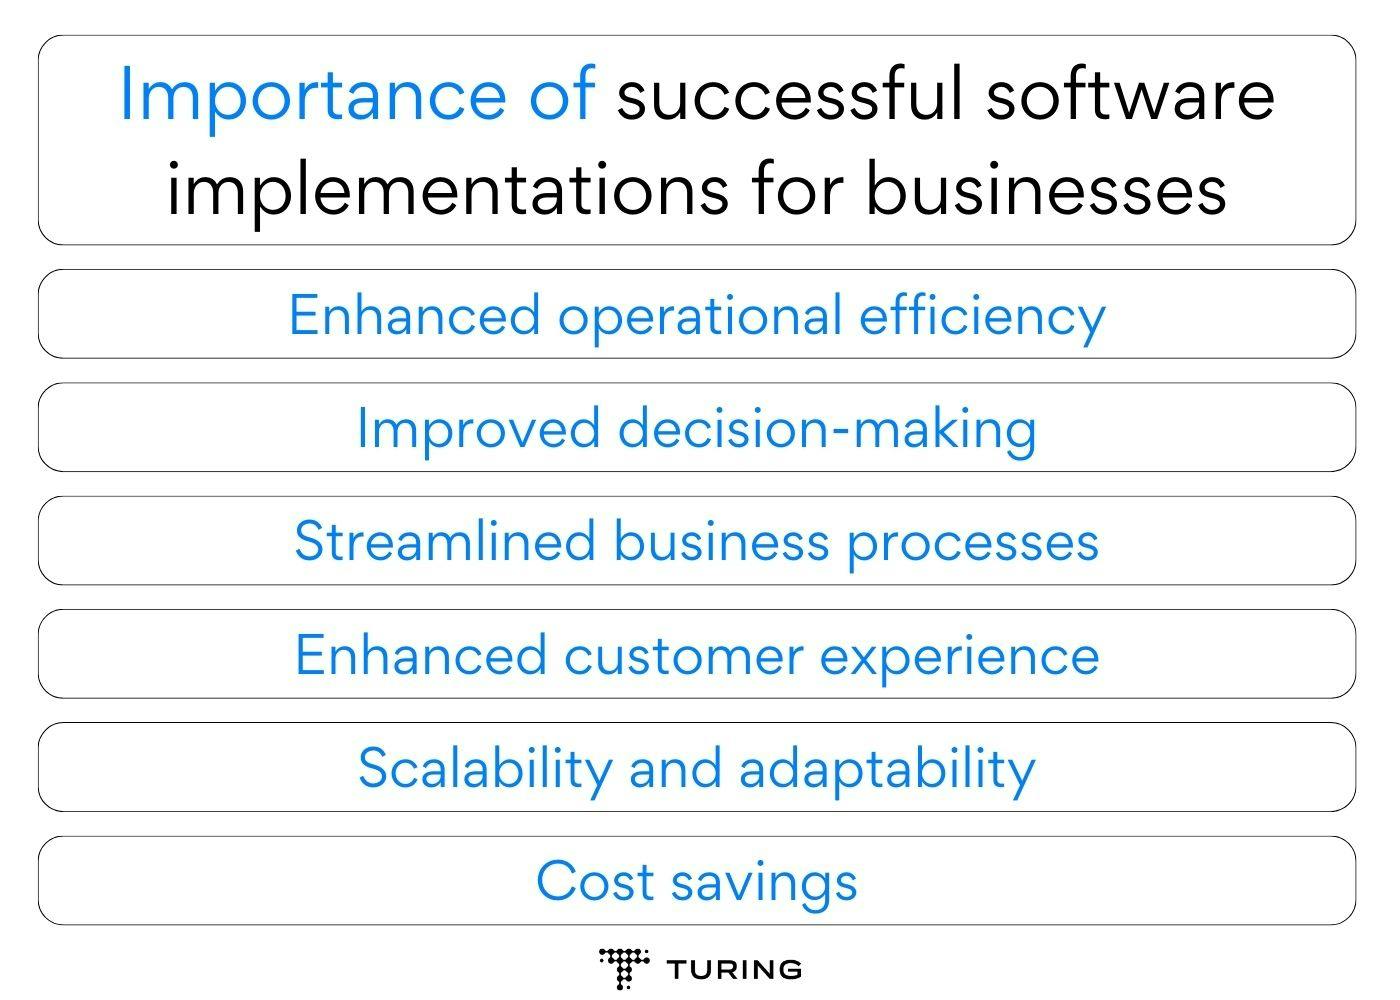 Importance of successful software implementations for businesses